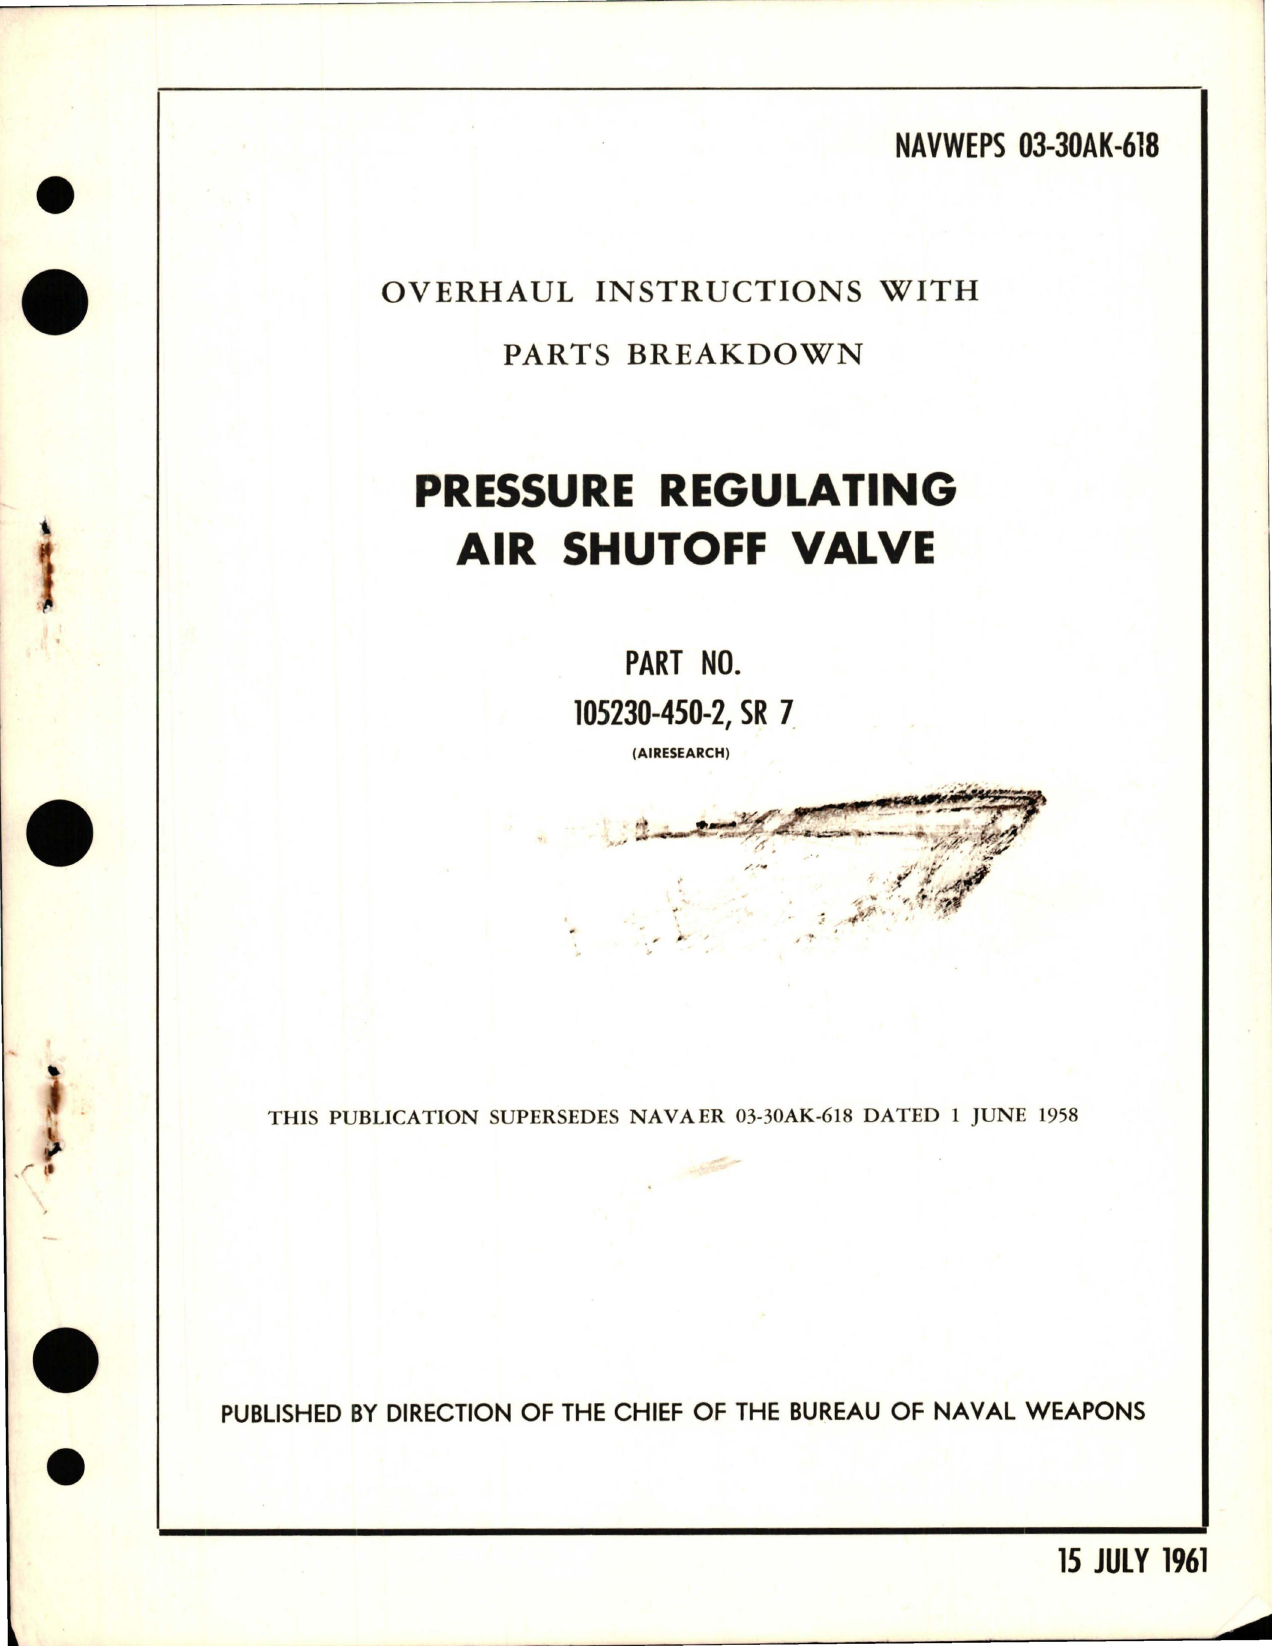 Sample page 1 from AirCorps Library document: Overhaul Instructions with Parts Breakdown for Pressure Regulating Air Shutoff Valve - Part 105230-450-2, SR 7